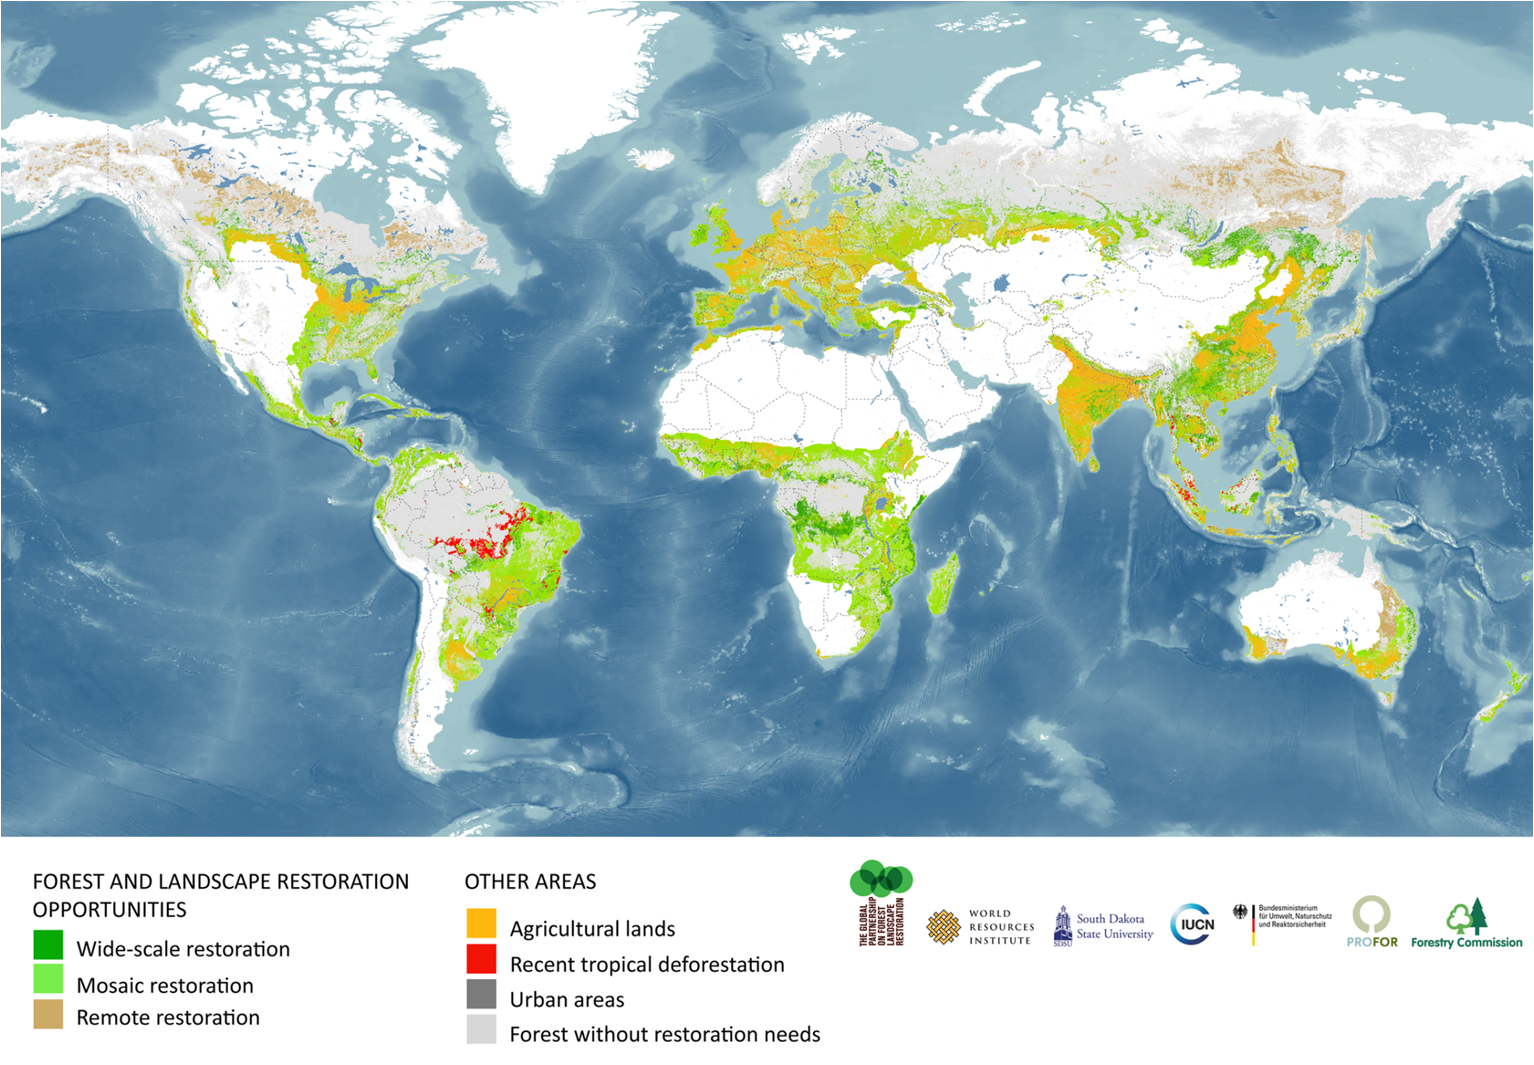 A World of Opportunity for Forest Landscape Restoration